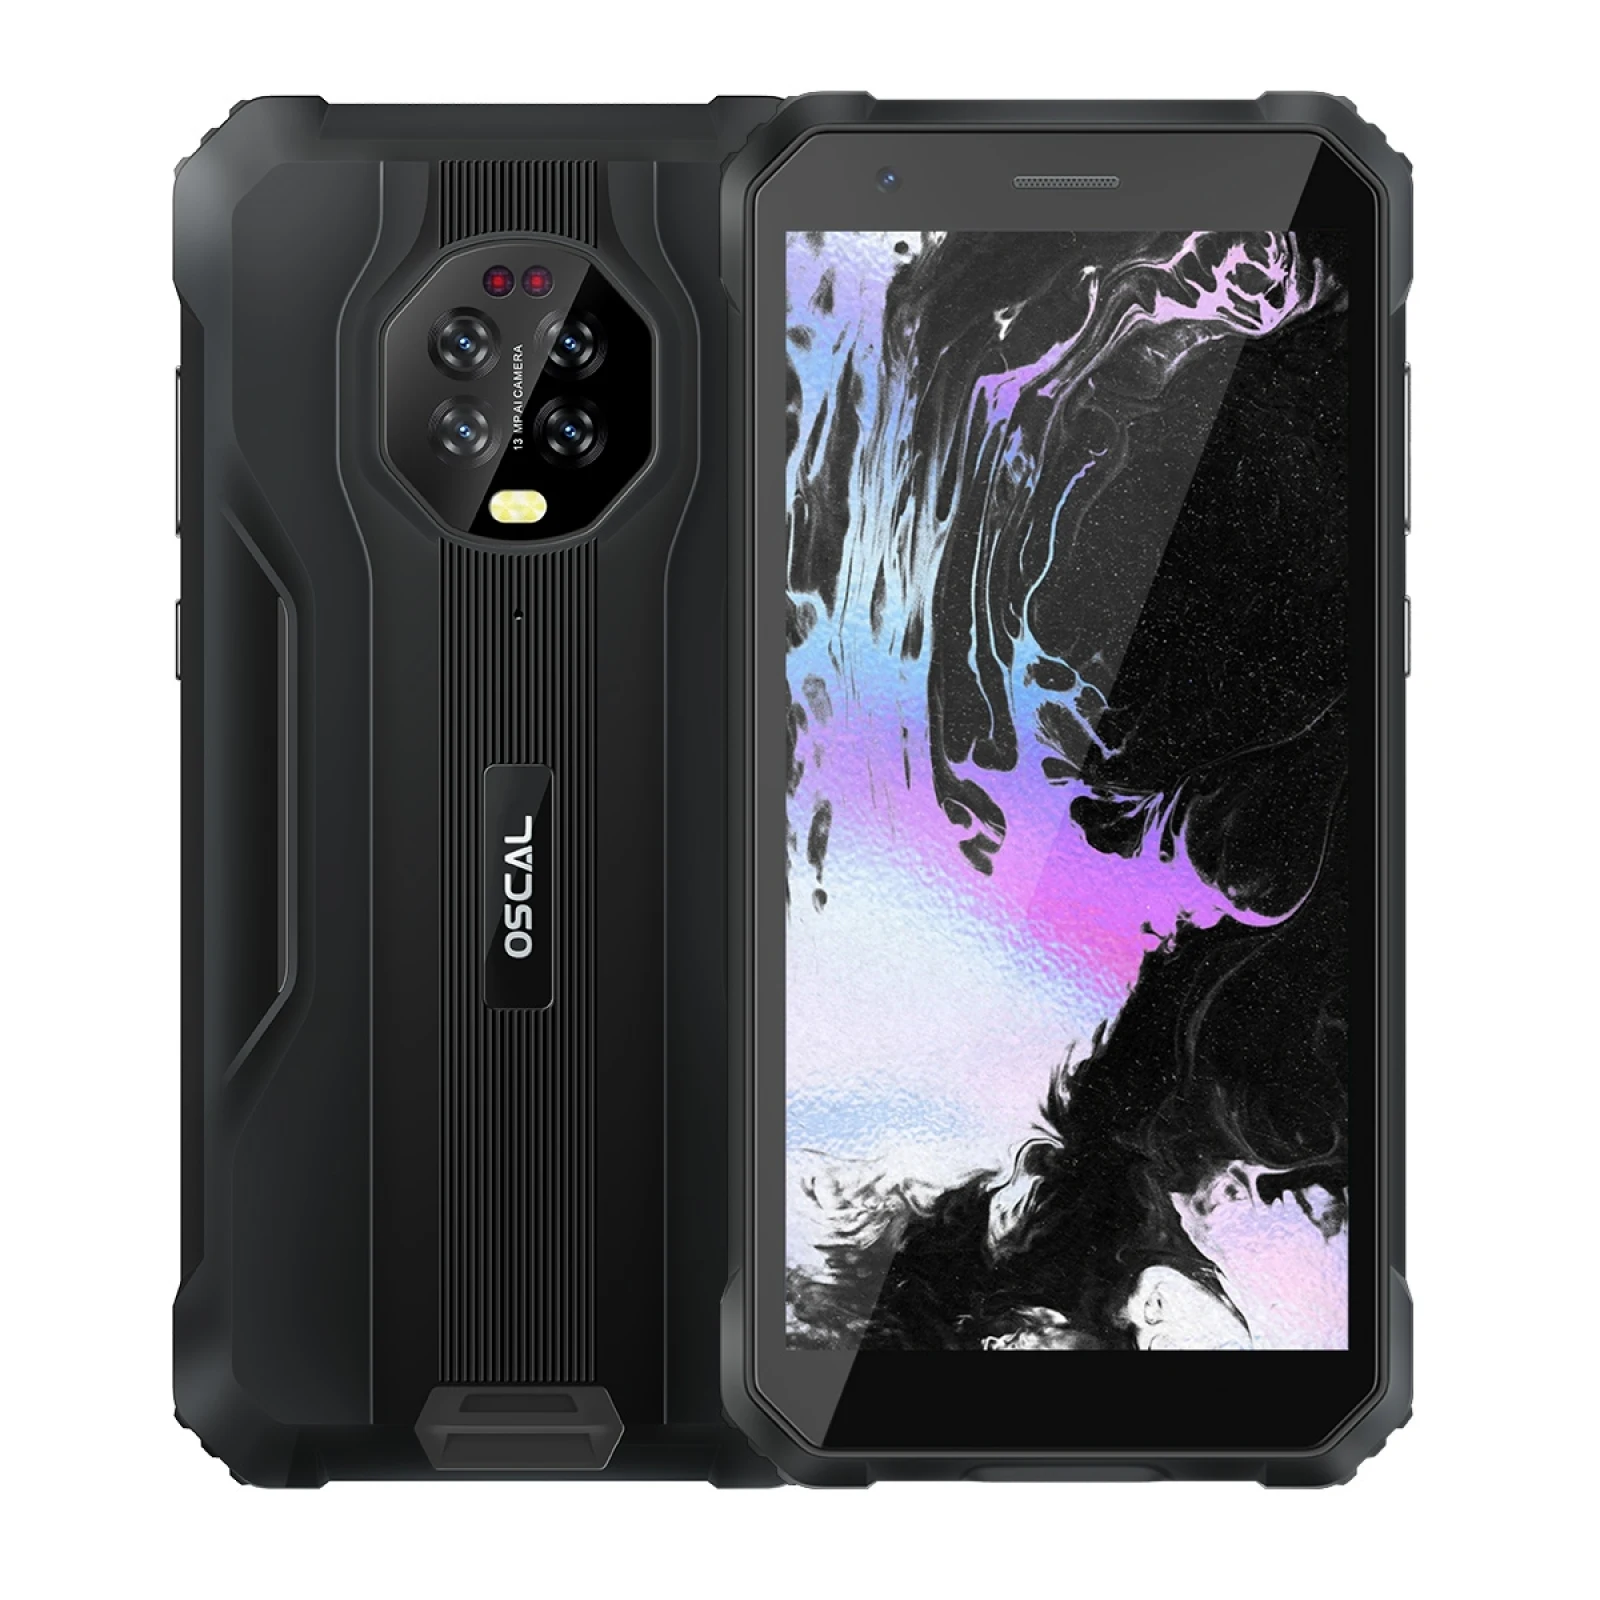 

BLACKVIEW OSCAL S60 Pro Night Vision Smartphone 5.7" Screen IP68 Waterproof Rugged Phone 4GB+32GB 5580mAh Android 11 Mobile